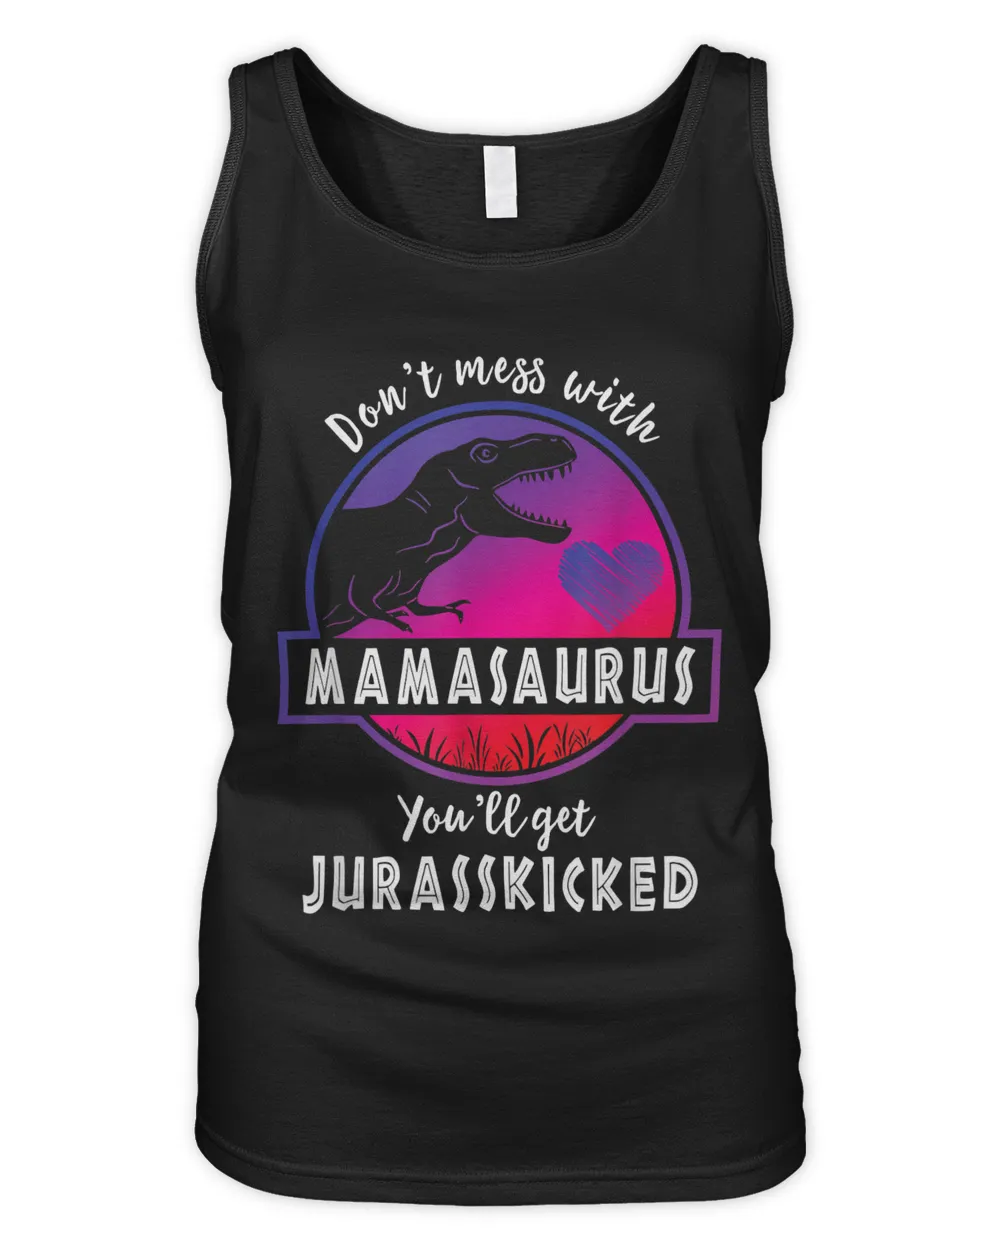 Don't Mess With Mamasaurus Youll Get Jurasskicked Mothers Day T-Shirt